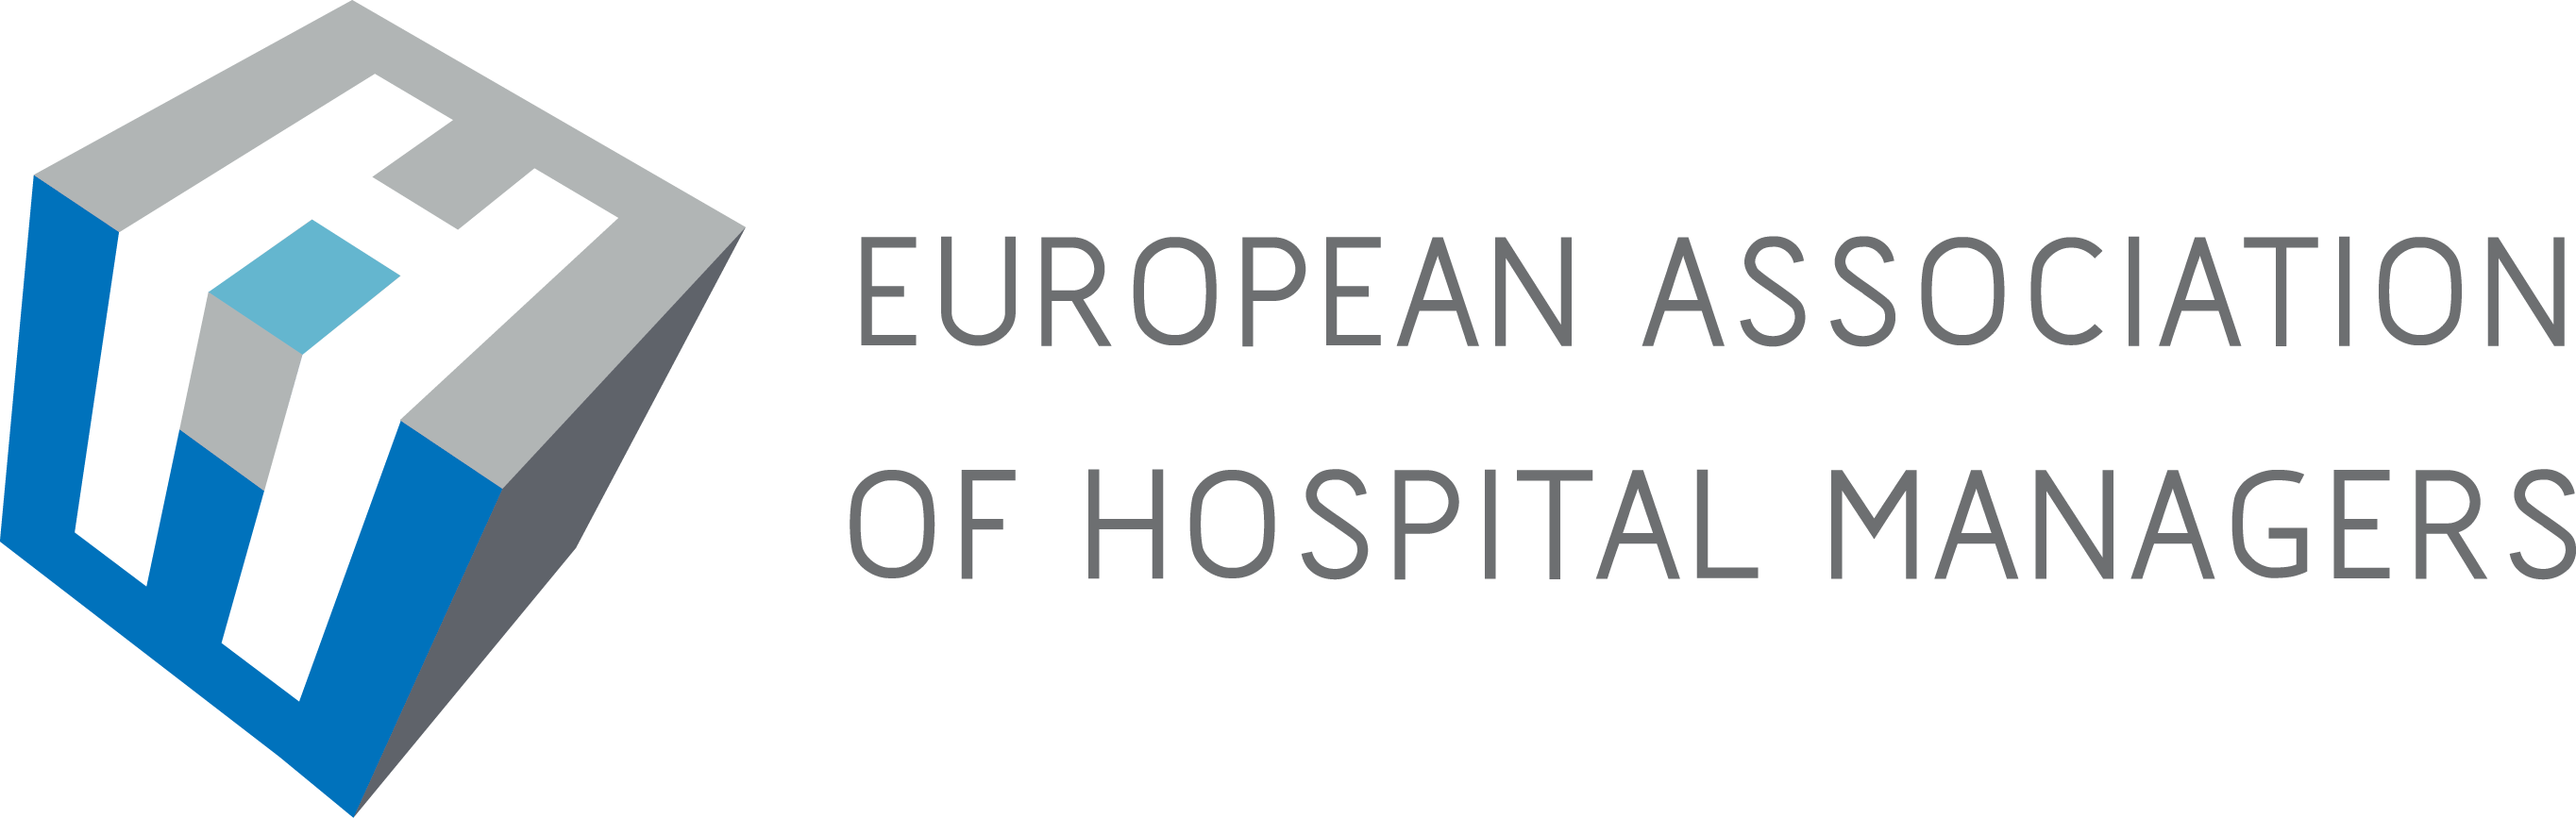 European Association of Hospital Managers